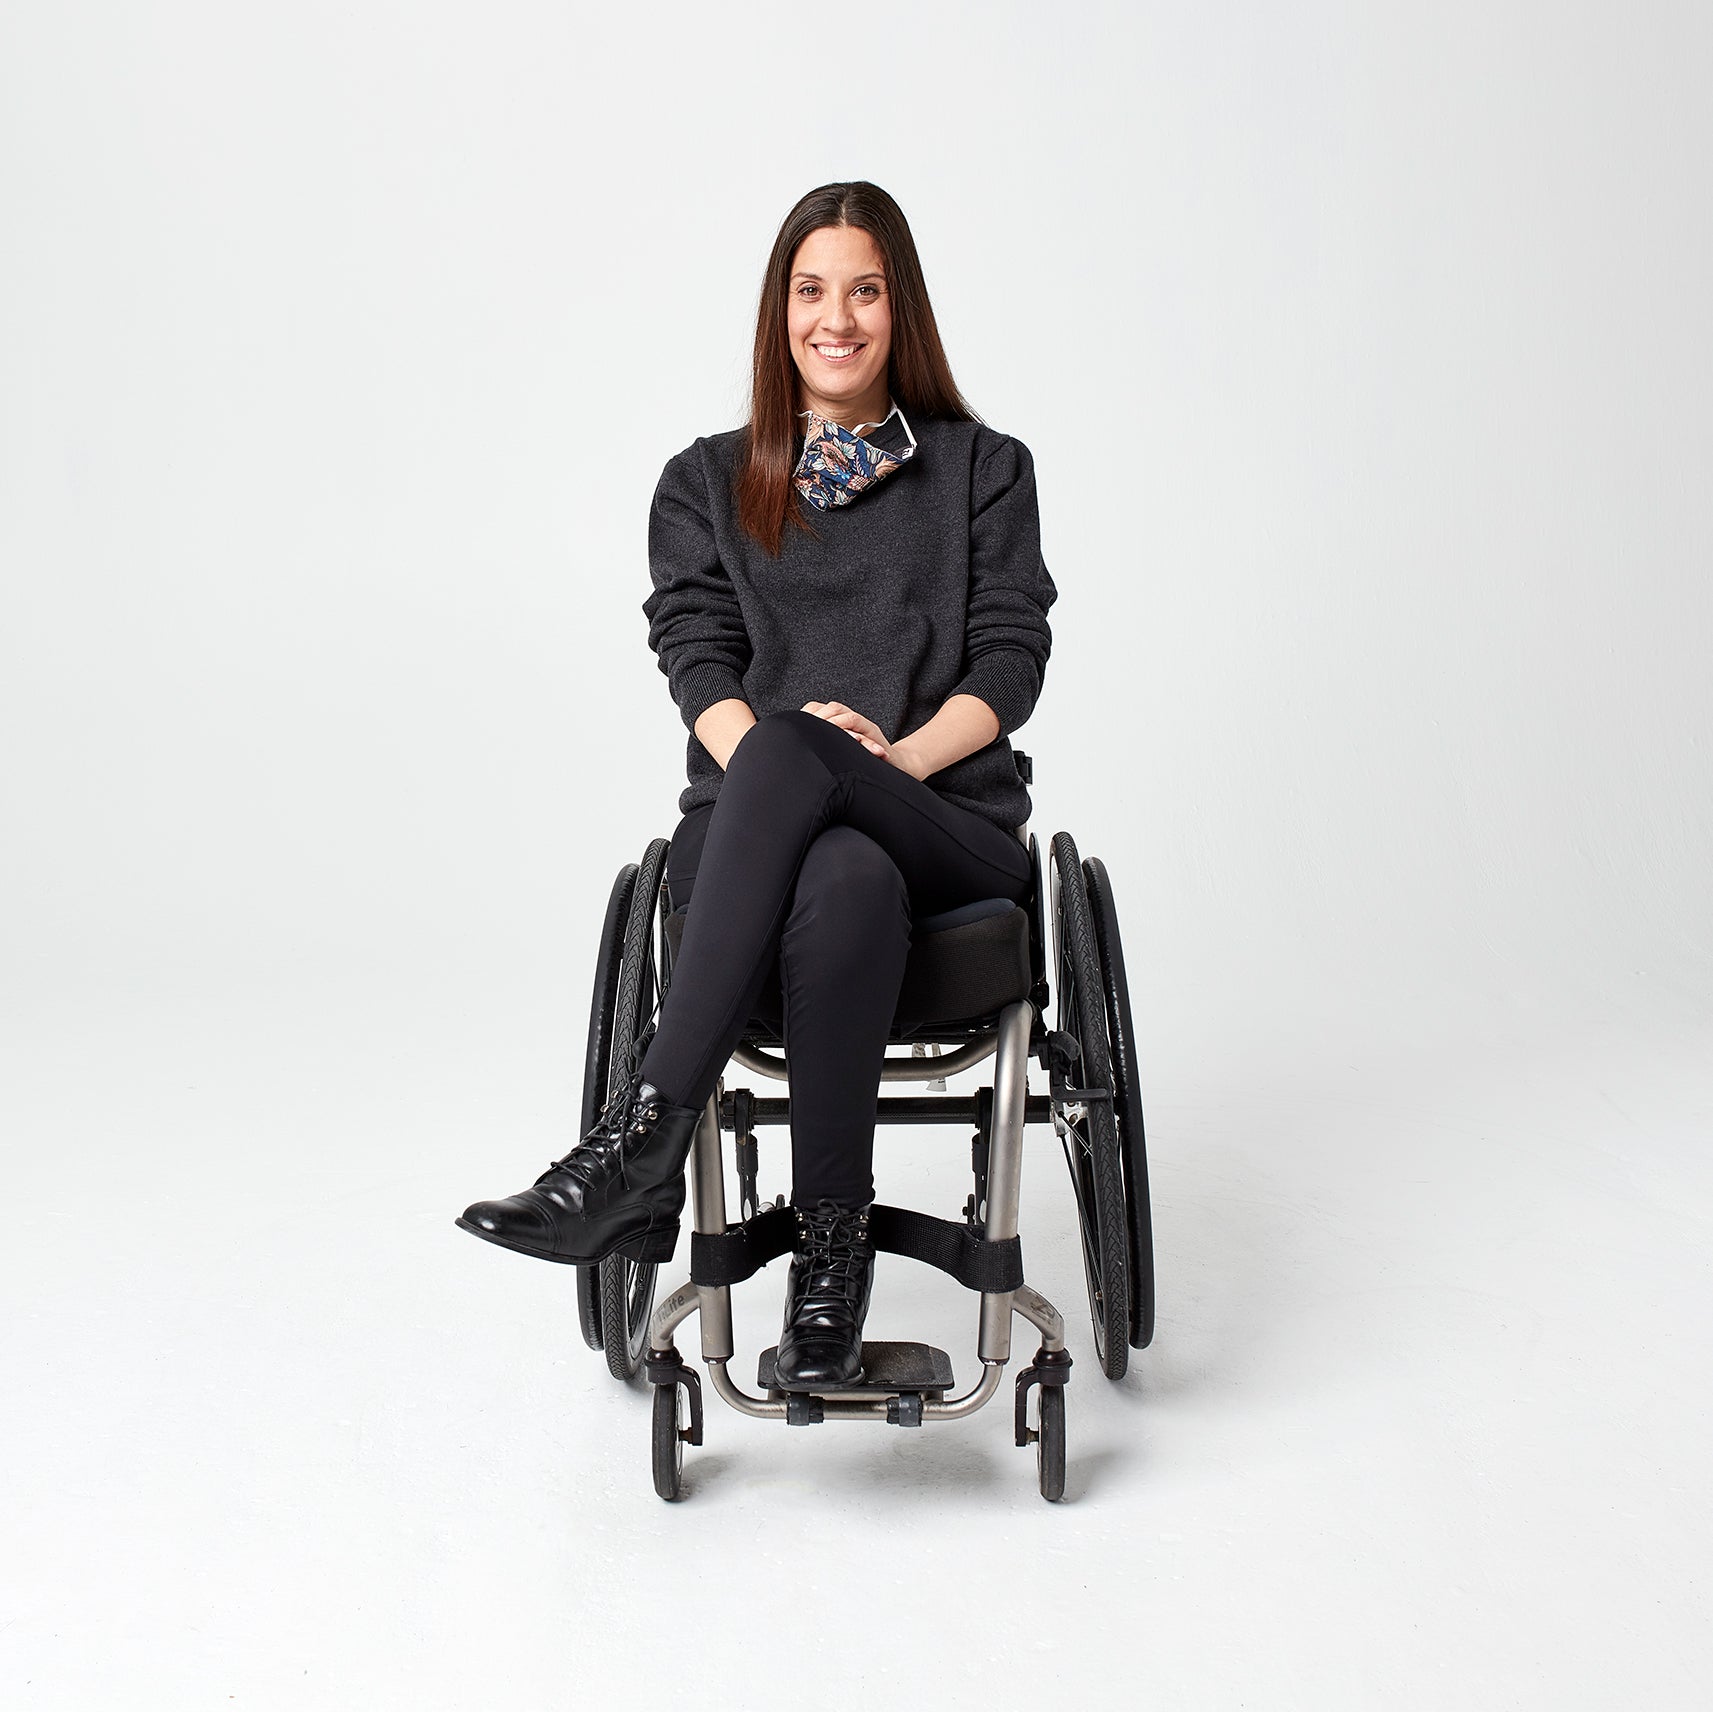 Women's Adaptive Seated Fit Pants - A New Day™ Black 4